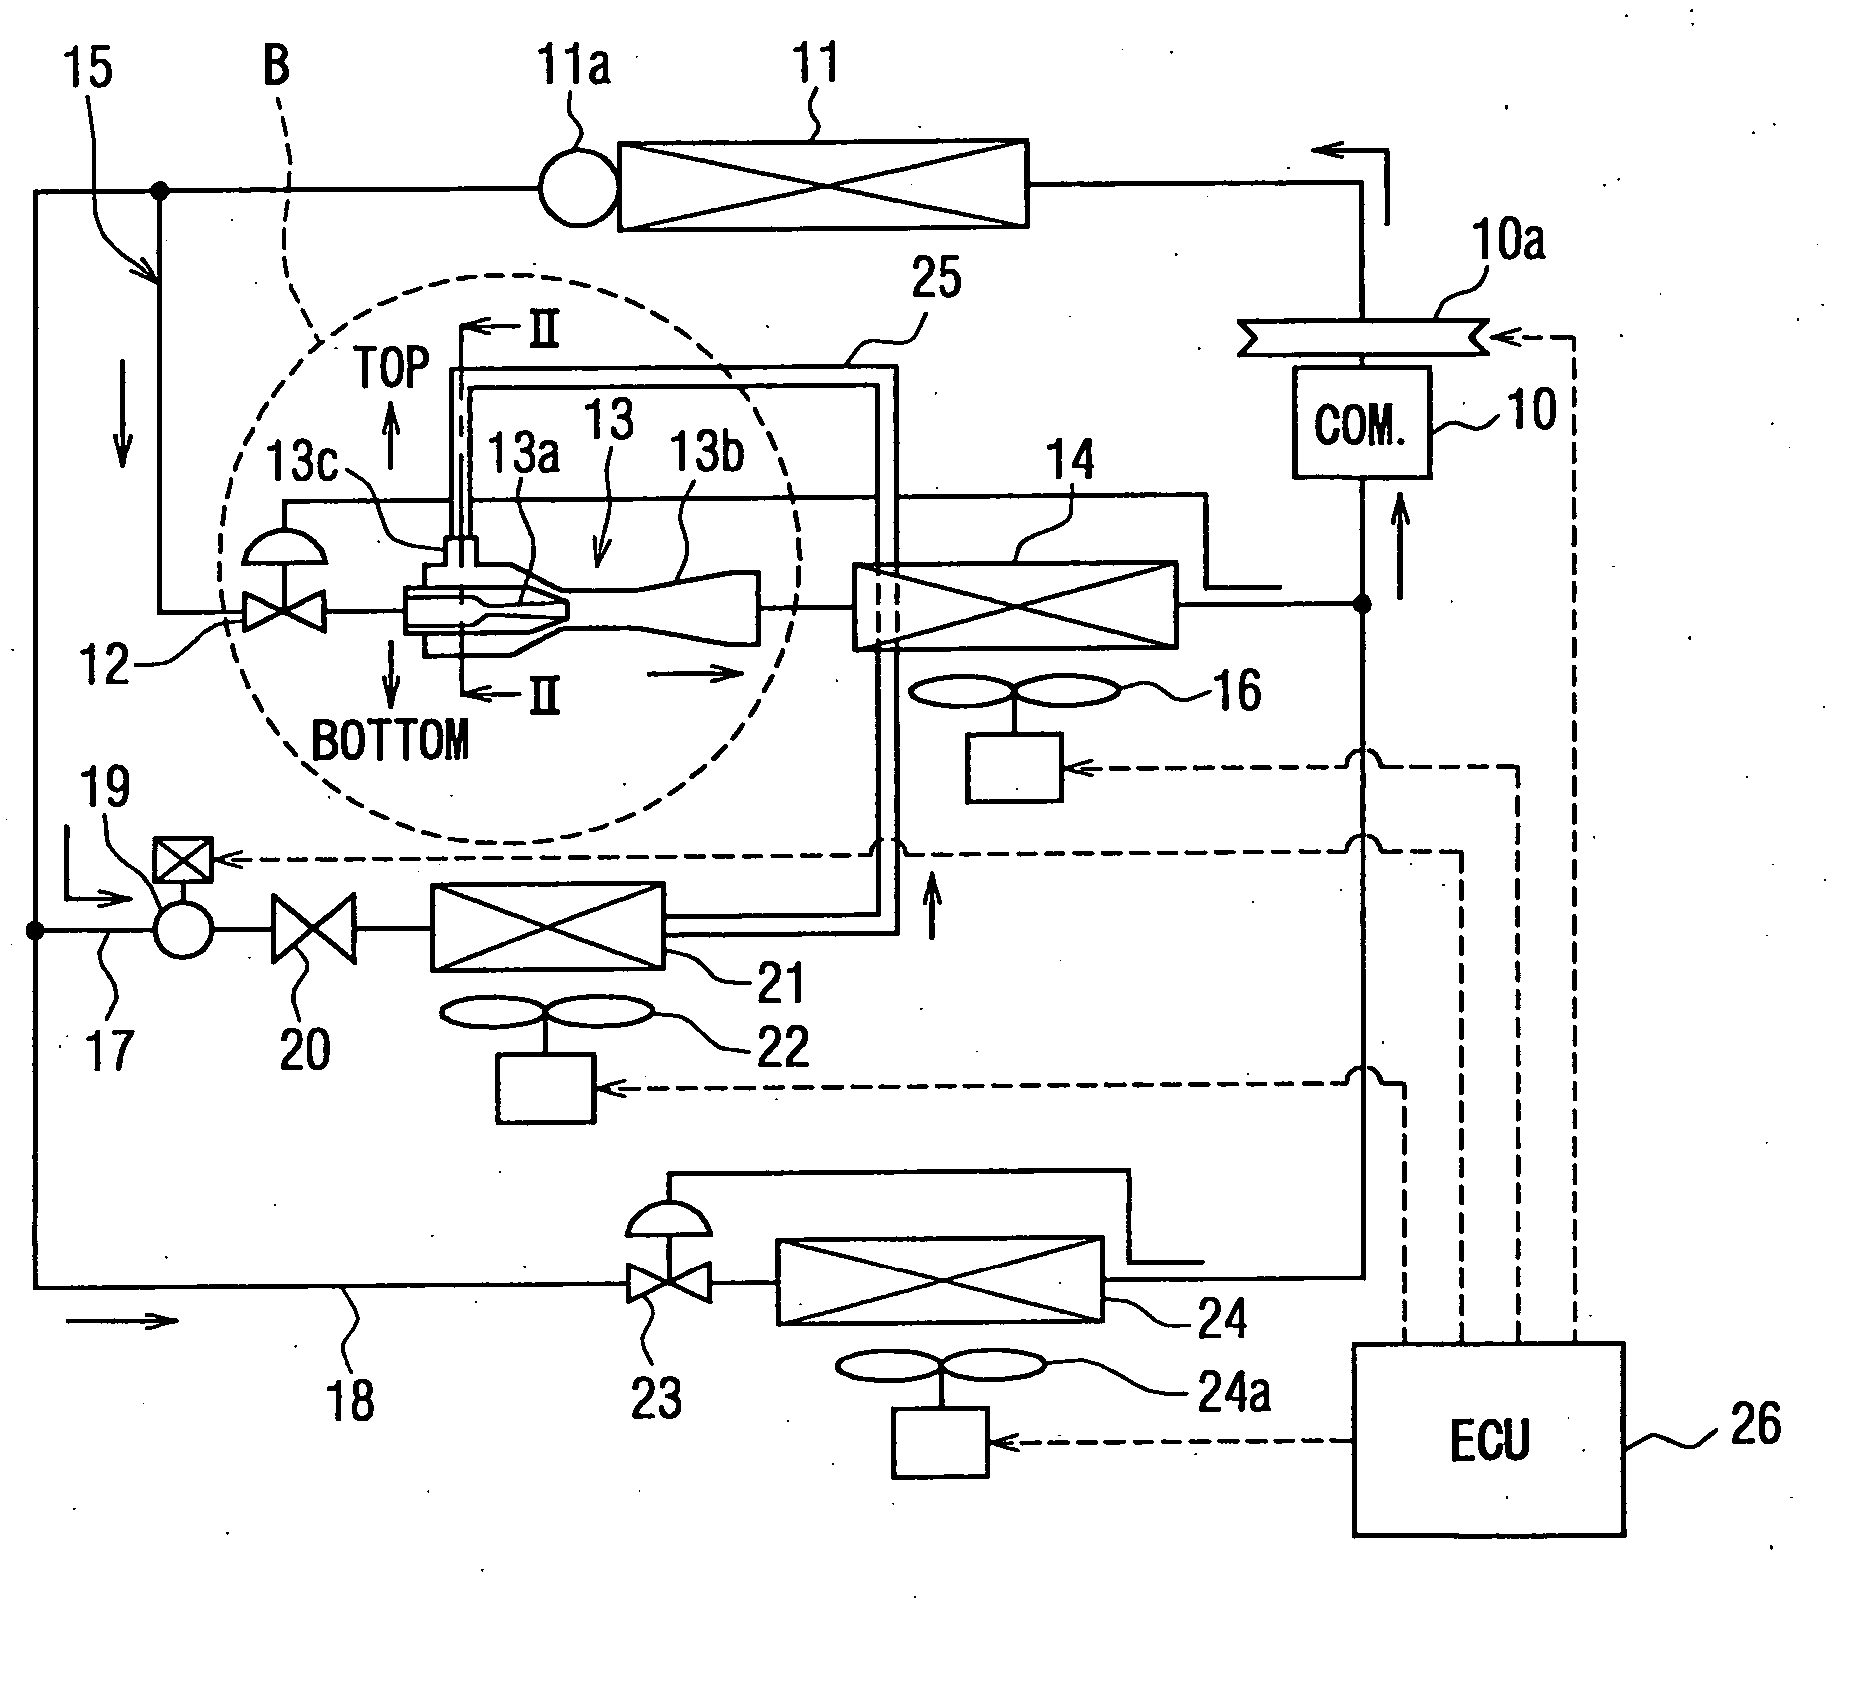 Vapor-compression refrigerant cycle system with ejector